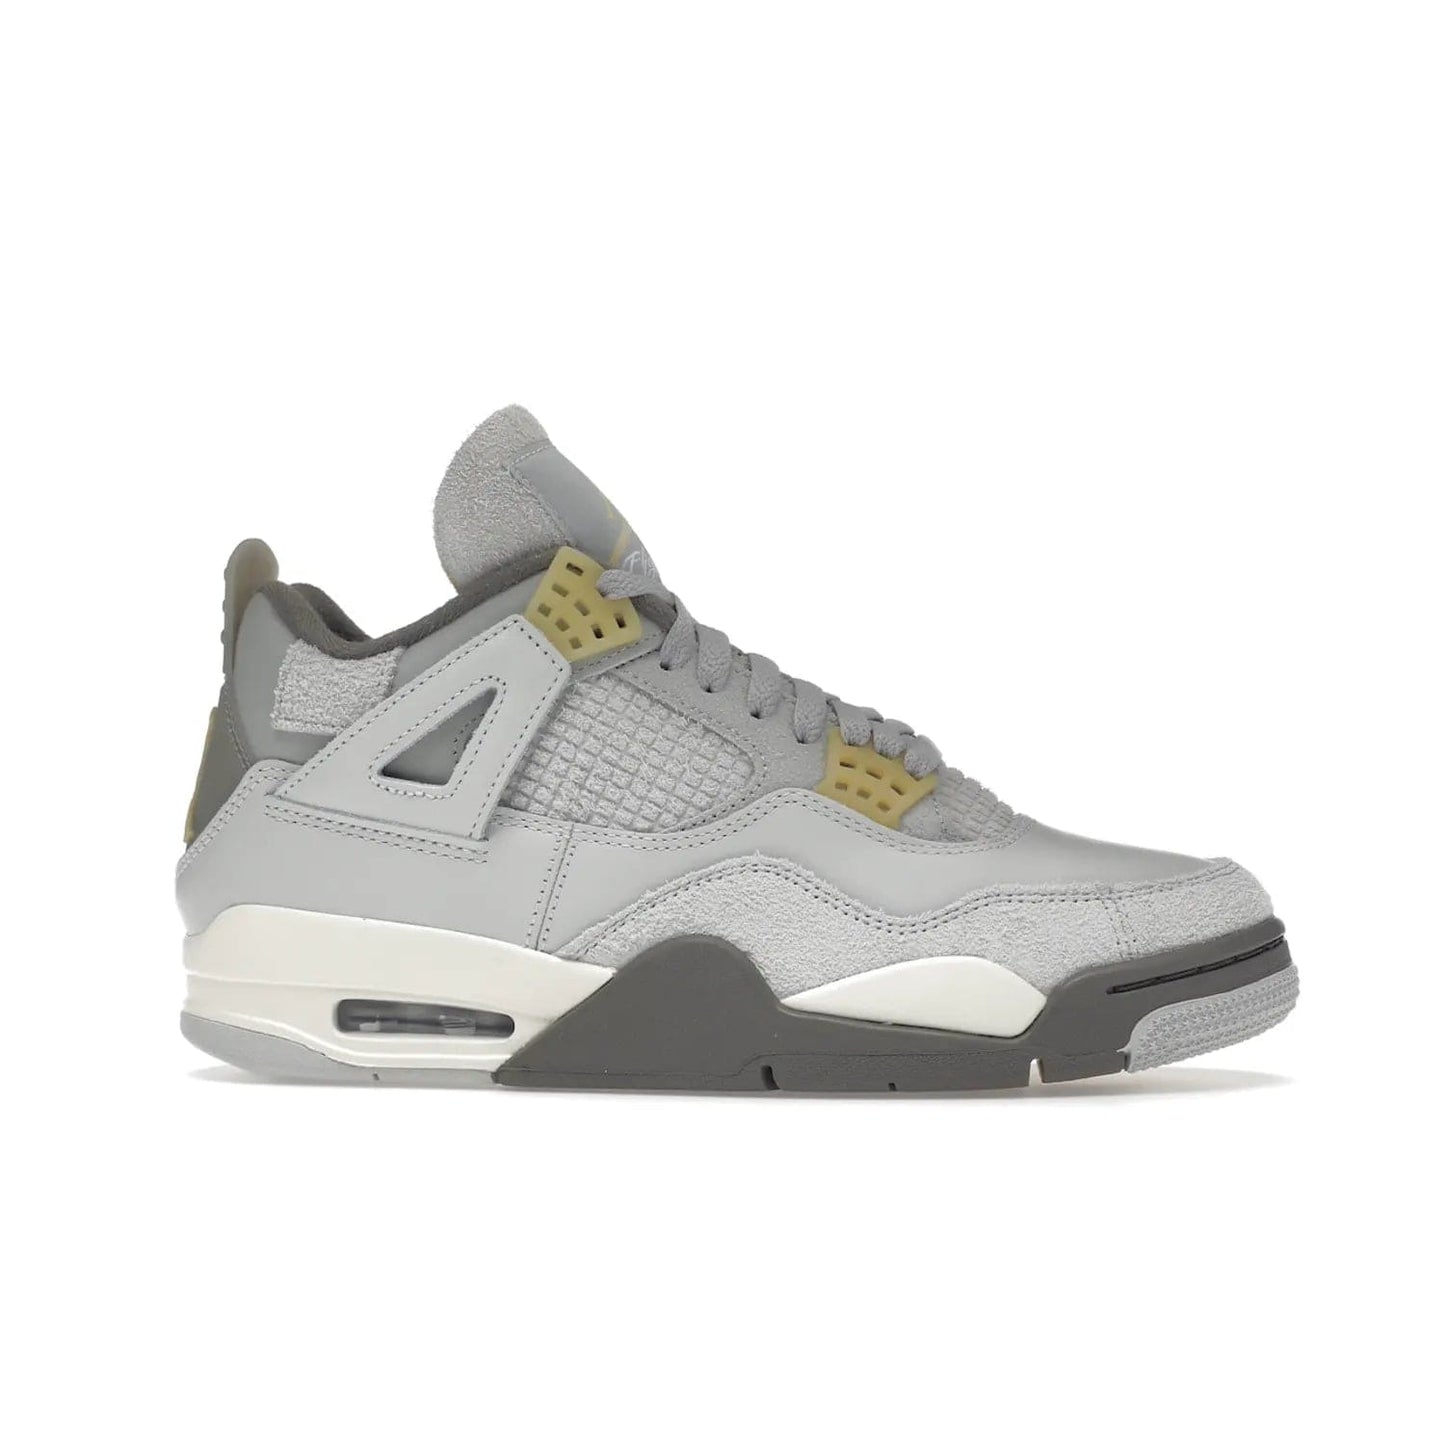 Jordan 4 Retro SE Craft Photon Dust - Image 2 - Only at www.BallersClubKickz.com - Upgrade your shoe collection with the Air Jordan 4 Retro SE Craft Photon Dust. This luxurious sneaker features a combination of suede and leather with unique grey tones like Photon Dust, Pale Vanilla, Off White, Grey Fog, Flat Pewter, and Sail. Available February 11, 2023.